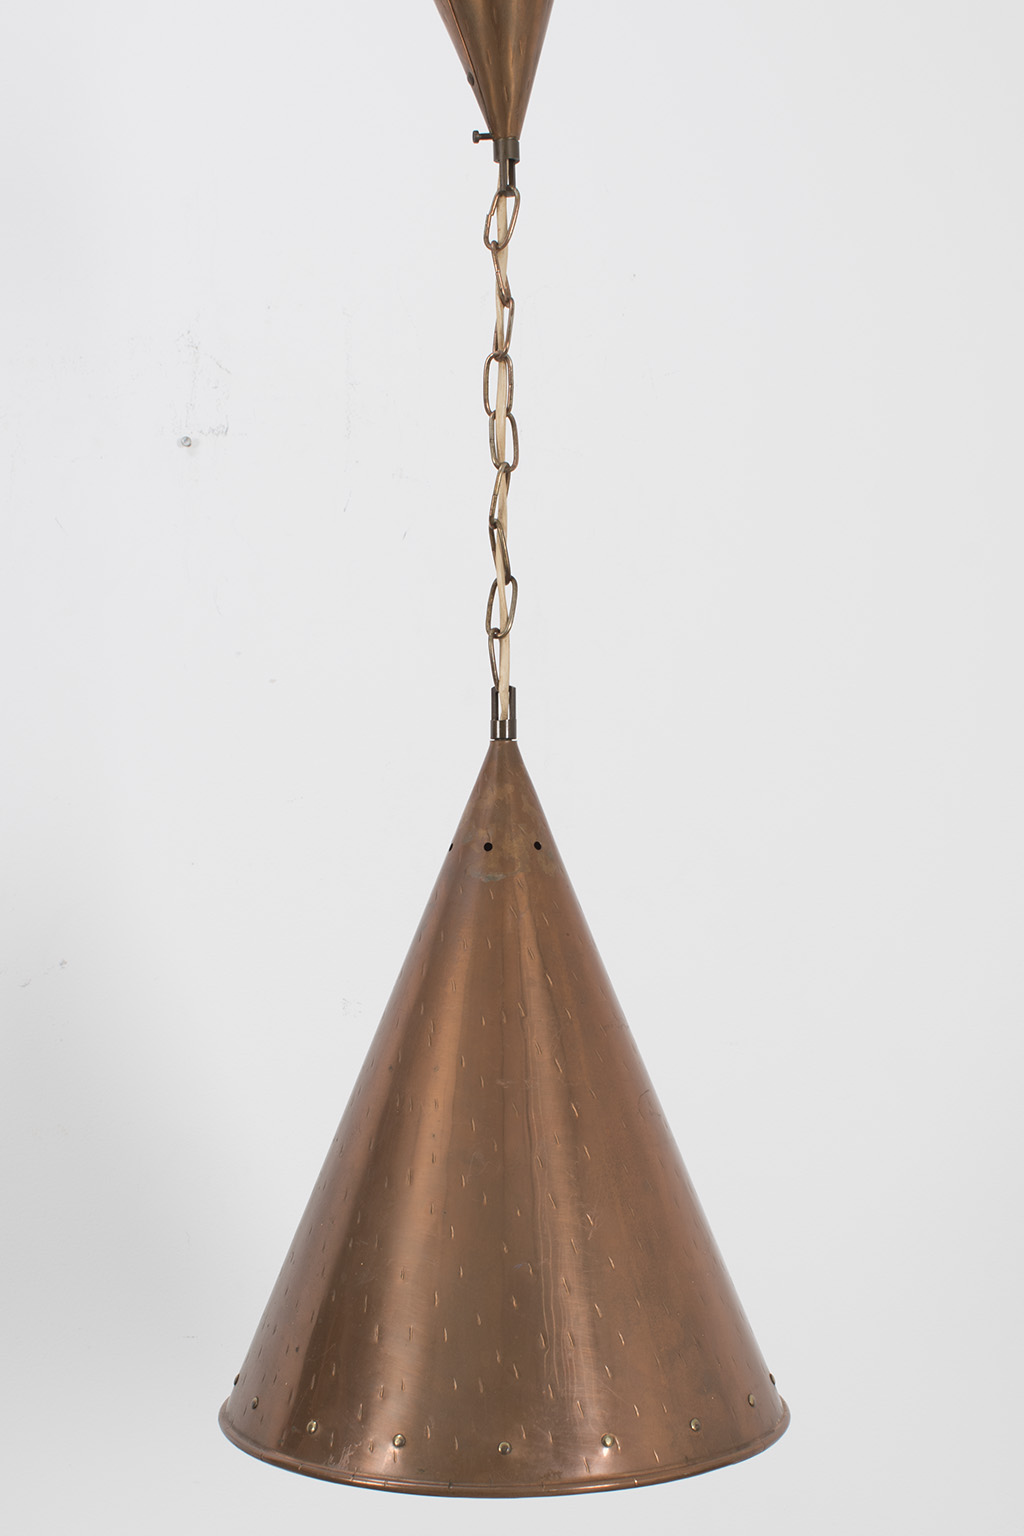 Danish hanging lamp from E.S Horn Aalestrup